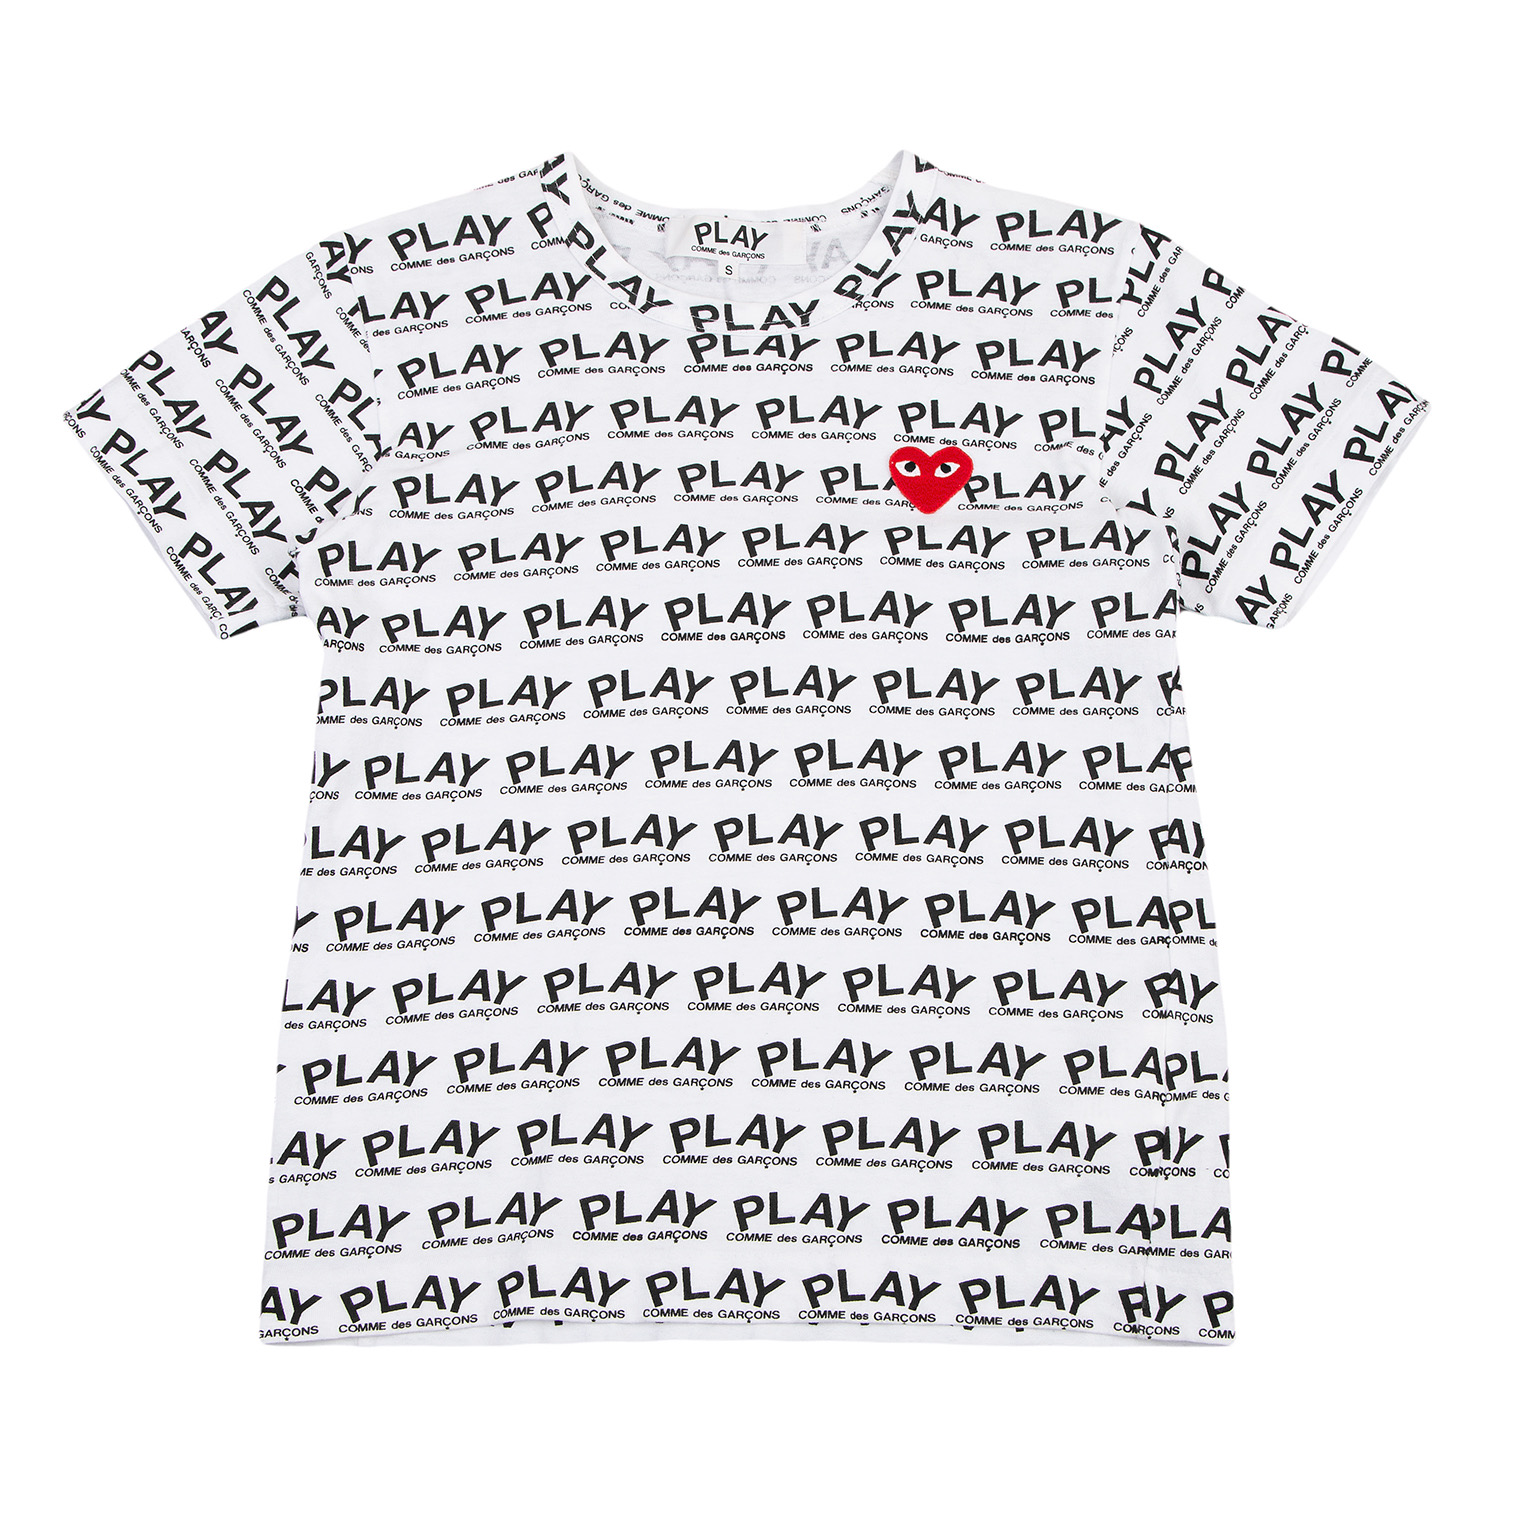 PLAY COMME des GARCONS Tシャツ・カットソー M 白なし開閉